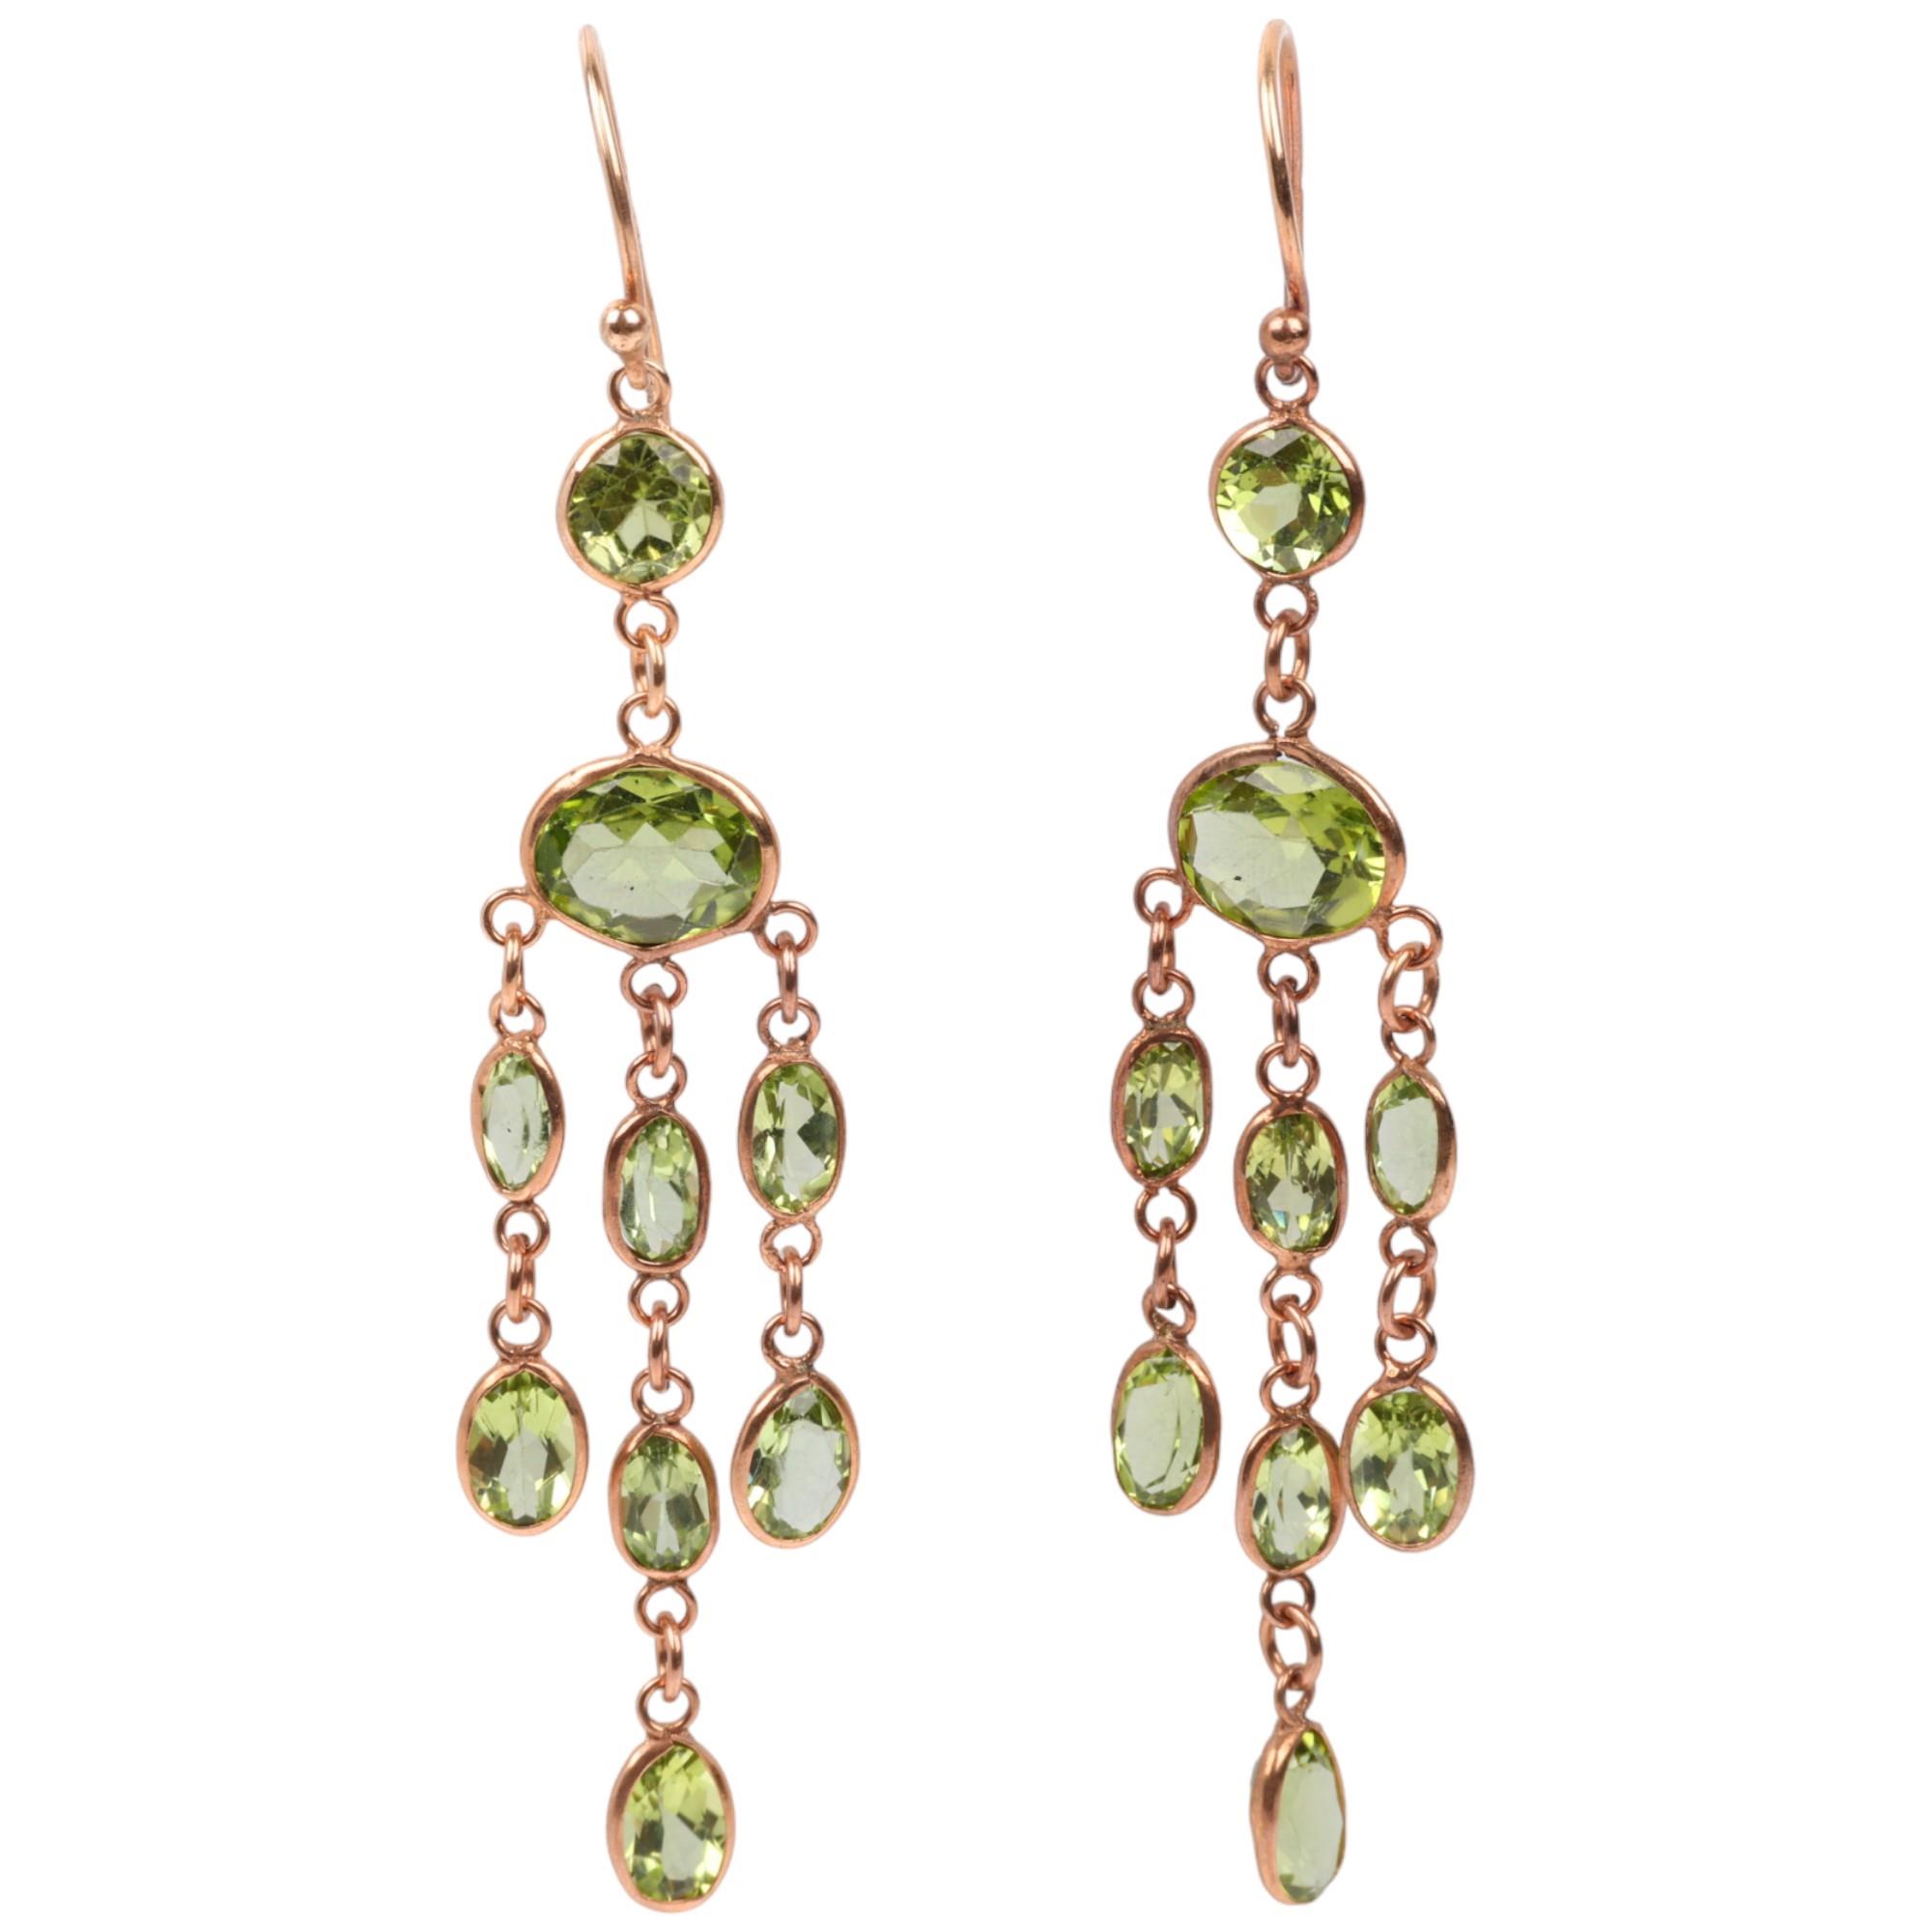 A pair of 9ct rose gold peridot triple drop earrings, maker SA, London 2017, set with oval and